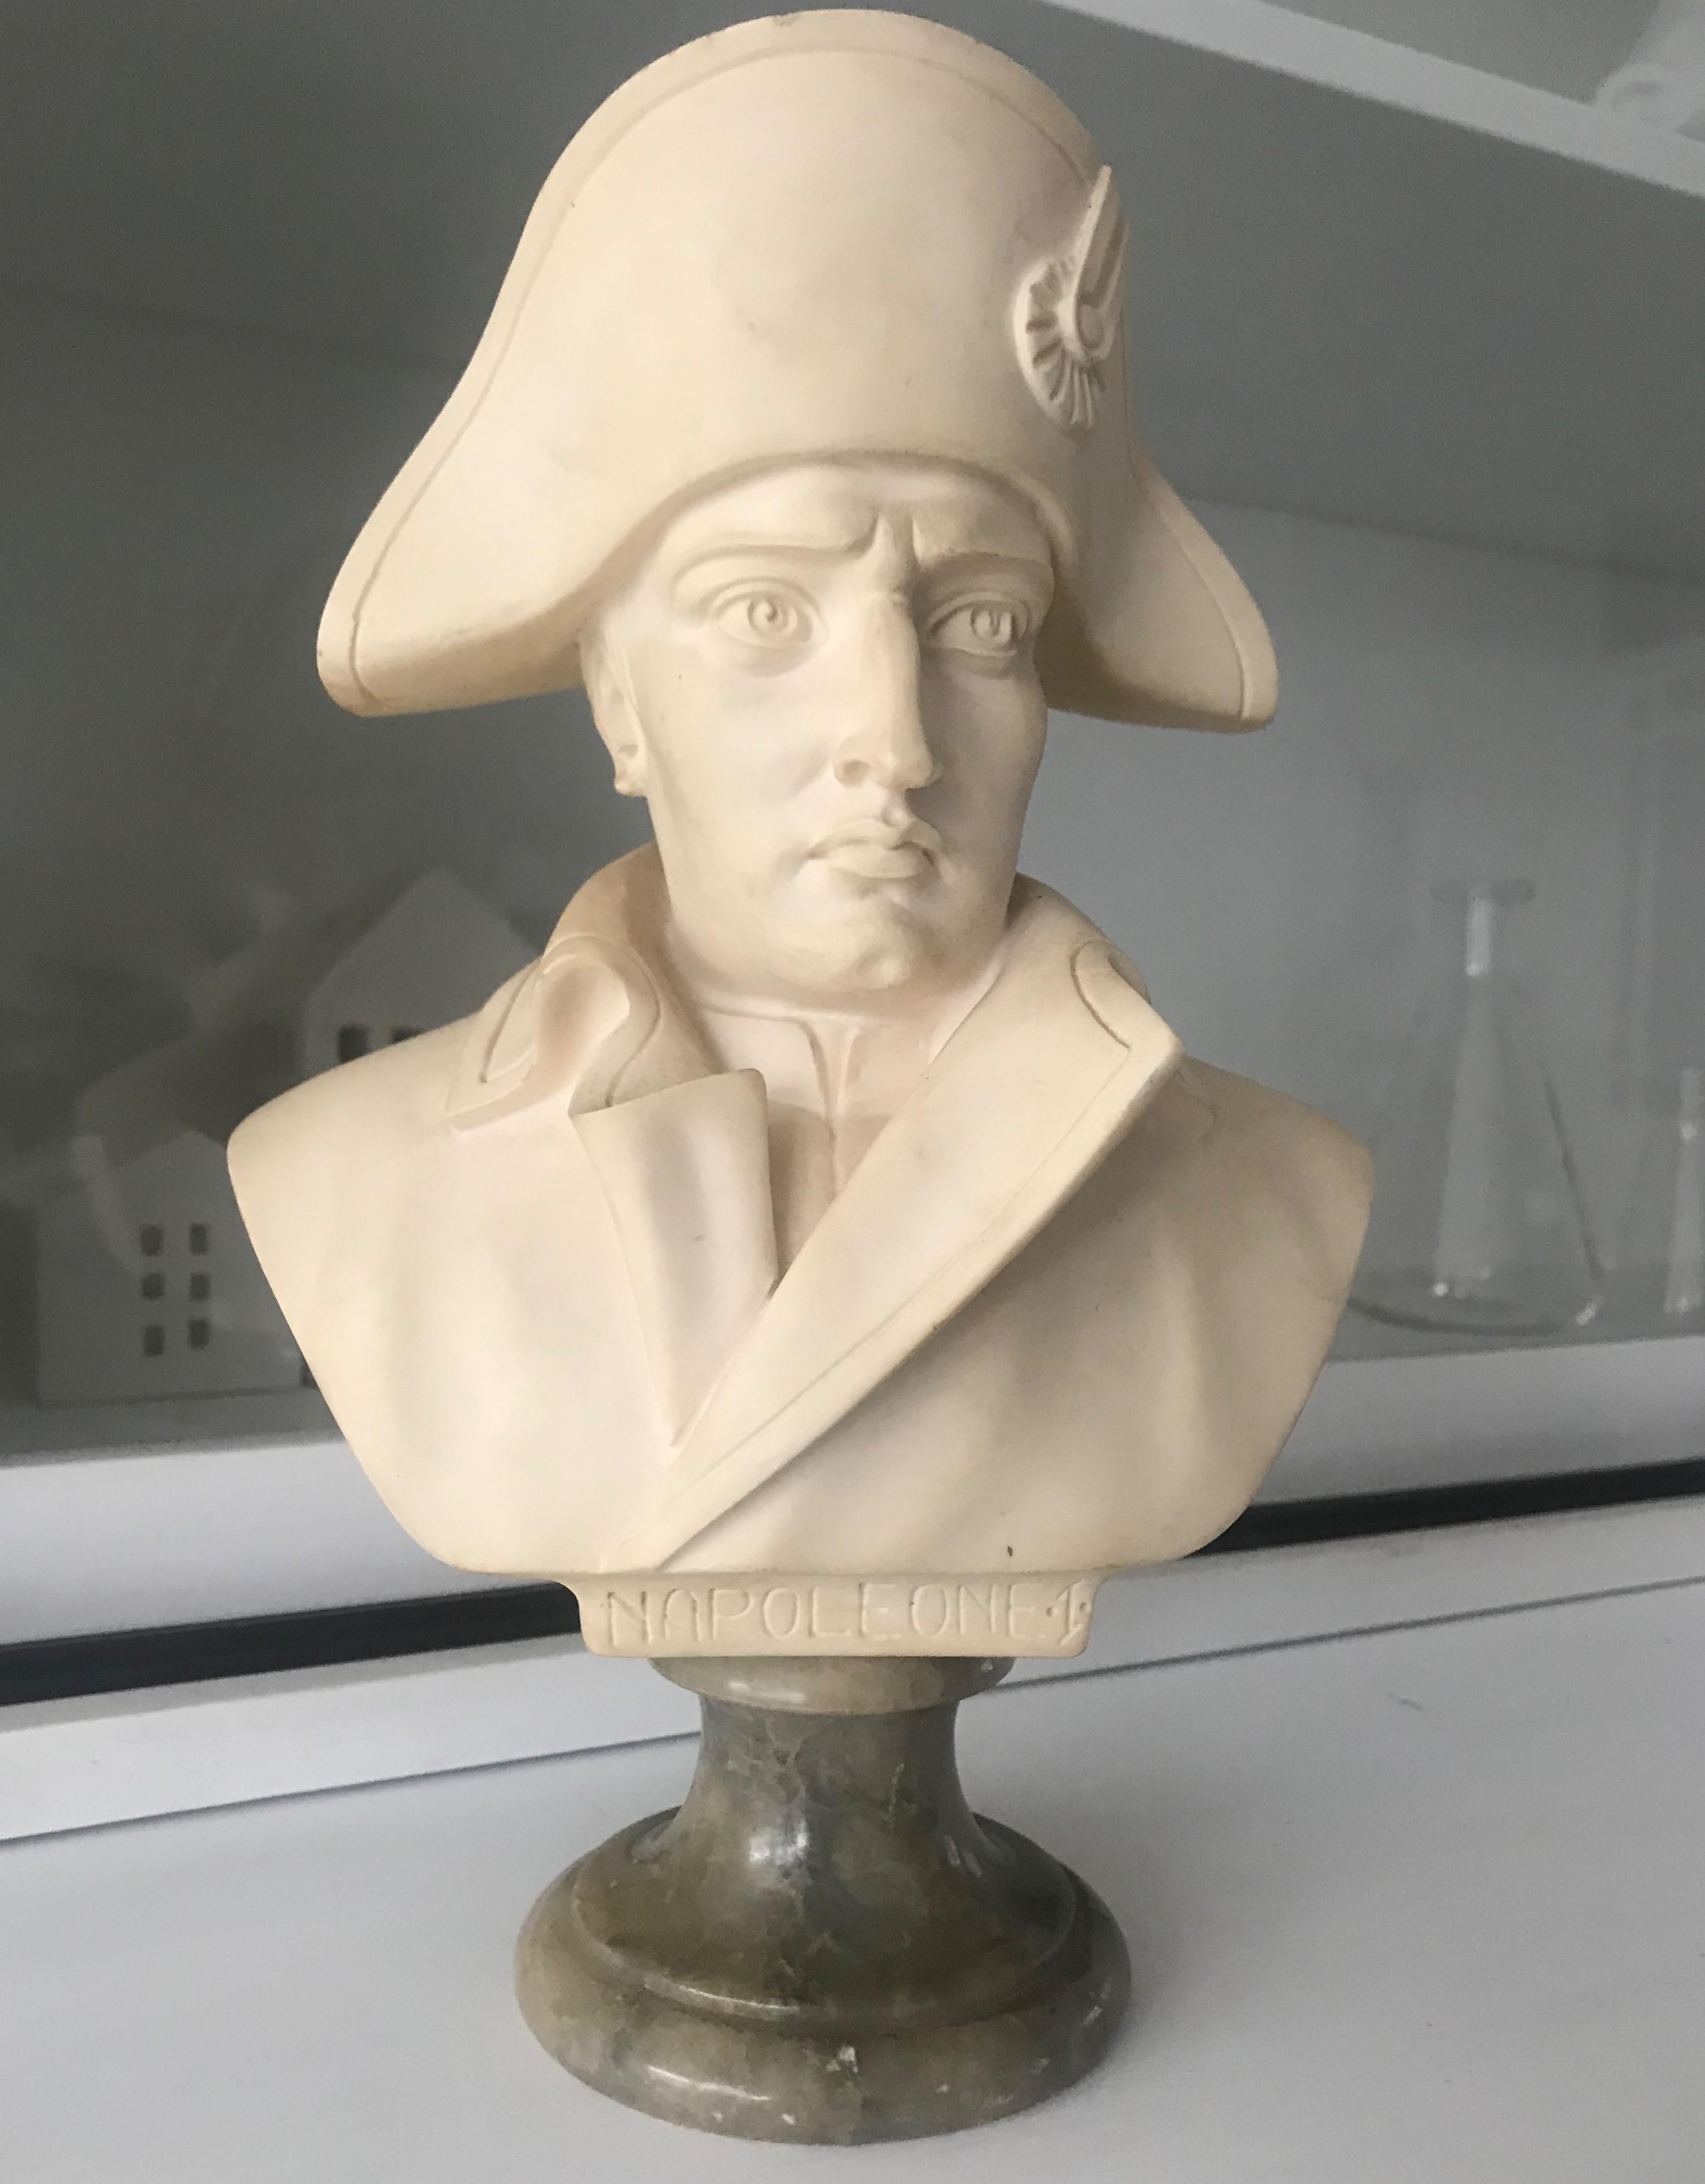 Good quality, handcrafted bust of Napoleon Bonaparte.

If you are a collector of good quality sculptures having to do with (French) historical figures then this rare and wonderful marble bust of Napoleon Bonaparte could be perfect for your